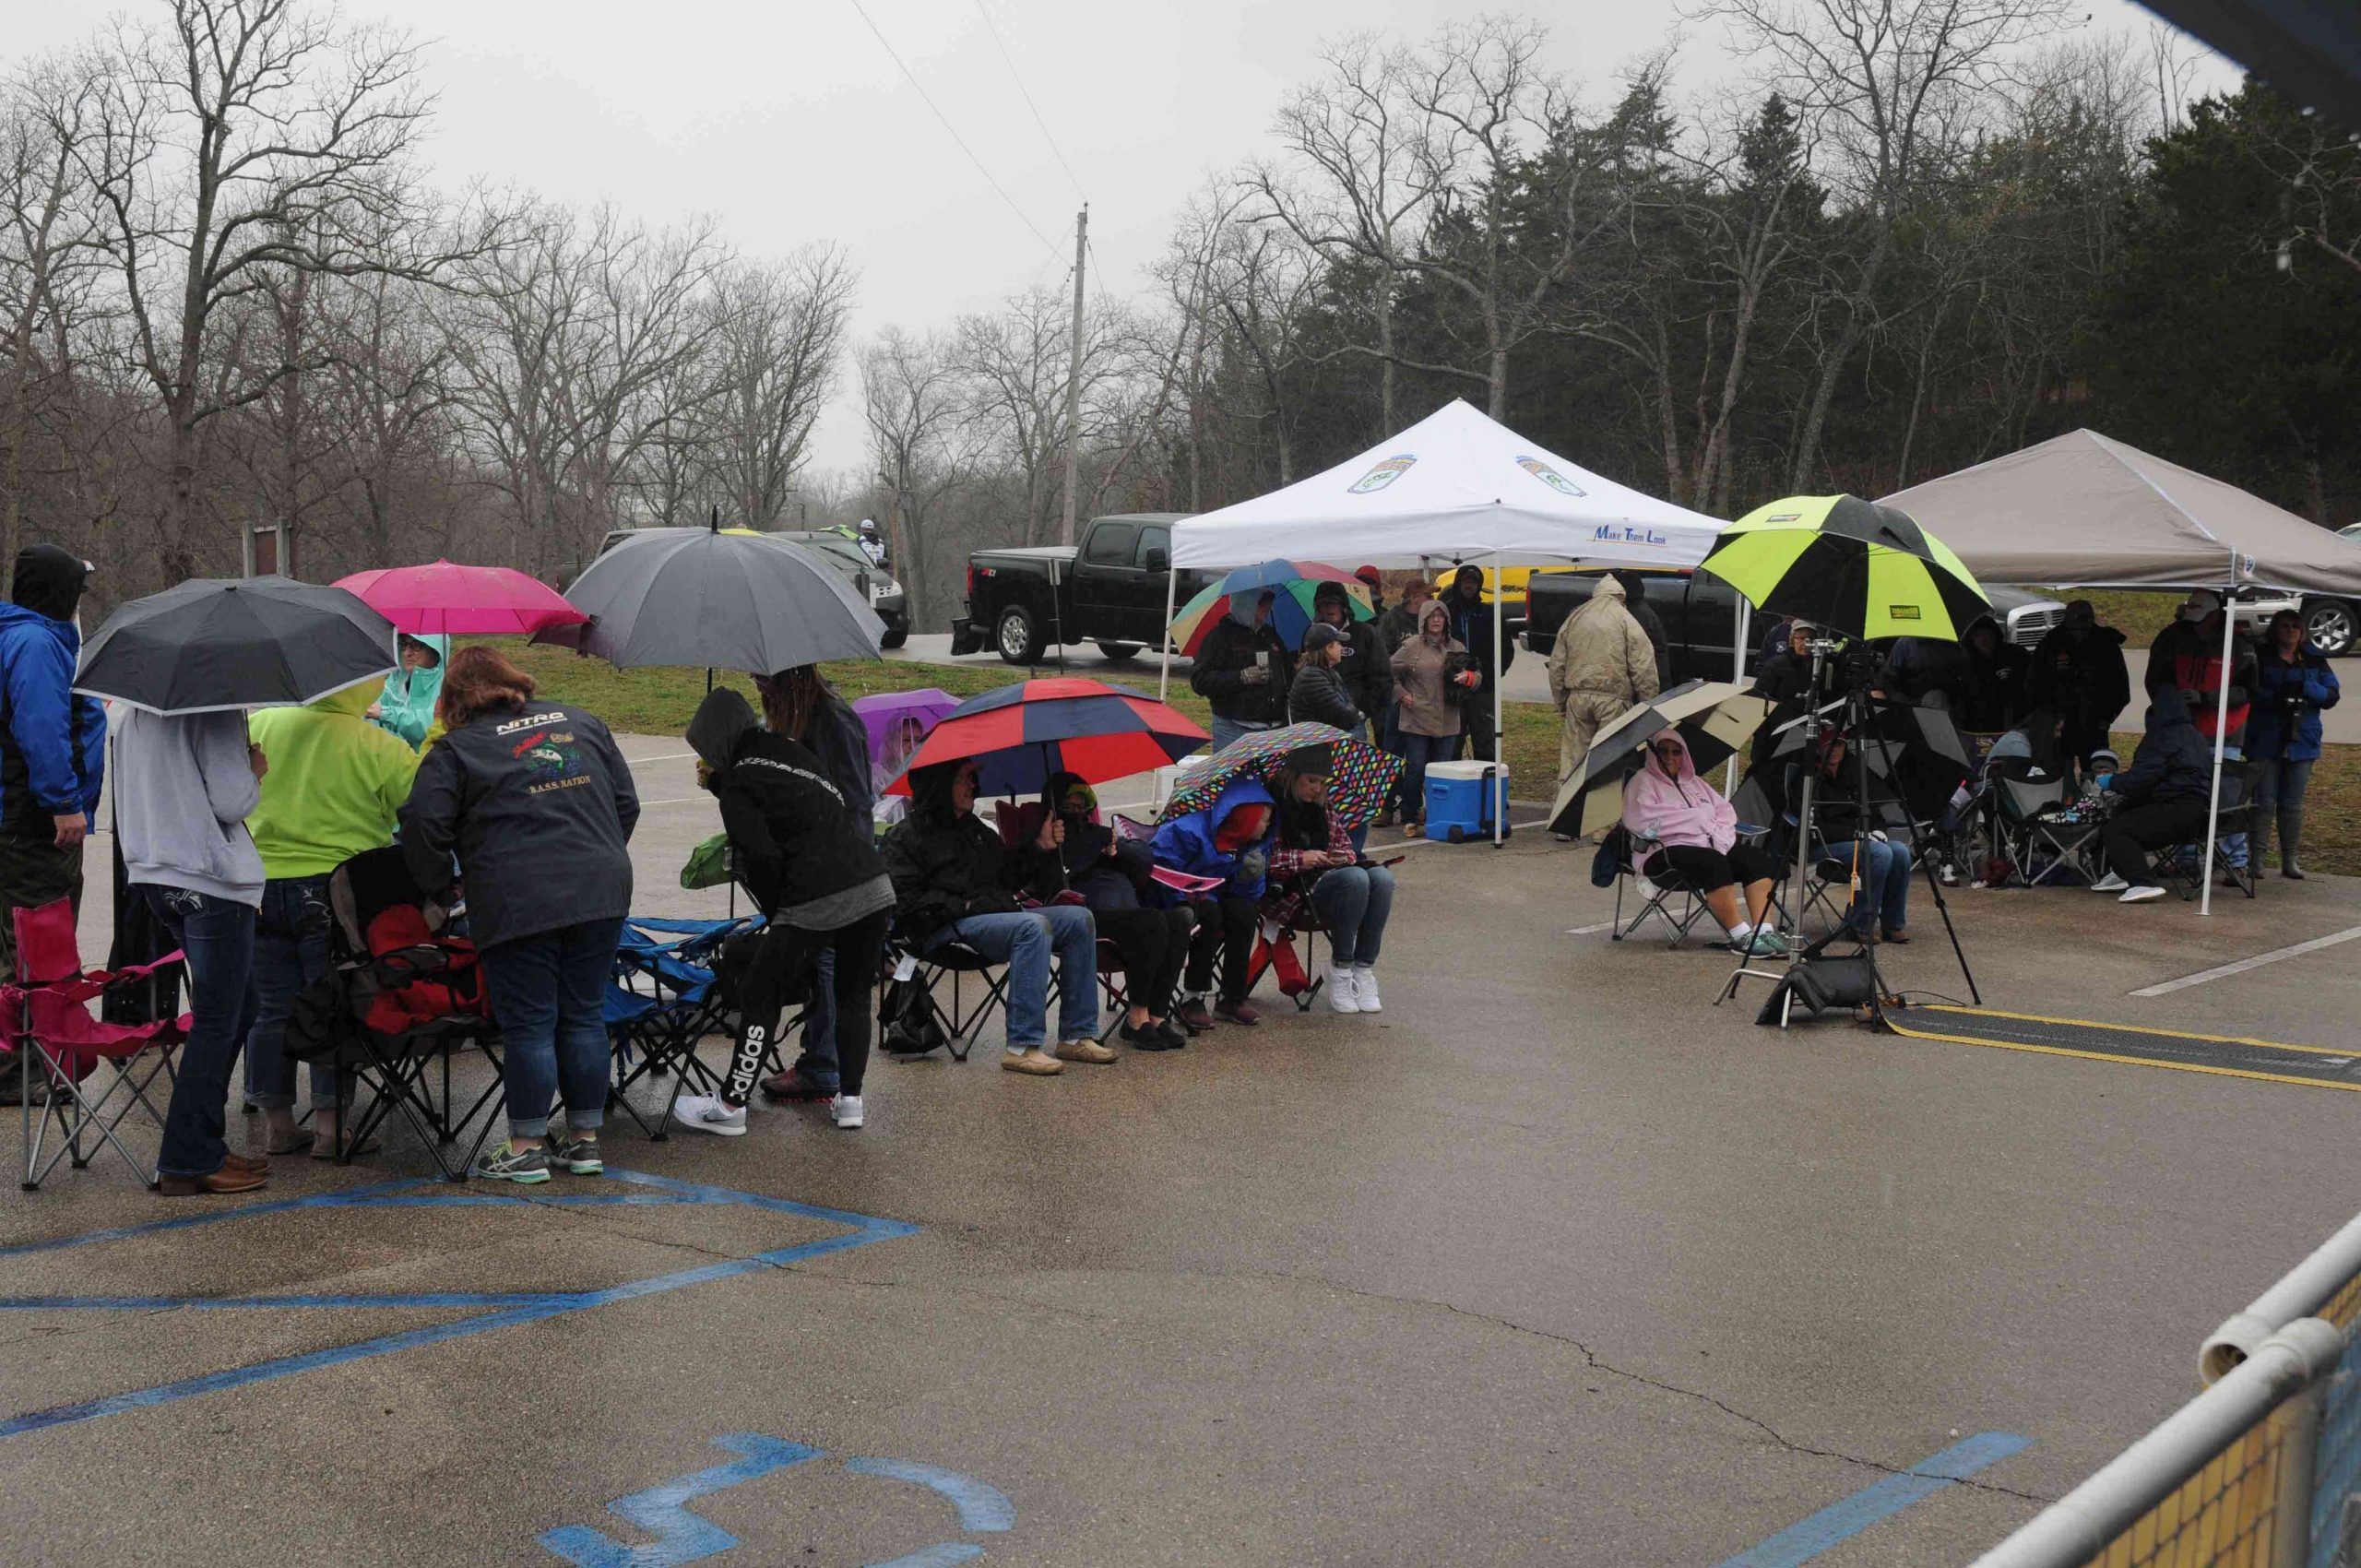  The crowd gathers for a soggy first weigh-in at the 2017 Academy Sports + Outdoors B.A.S.S. Nation Central Regional presented by Magellan Outdoors.
